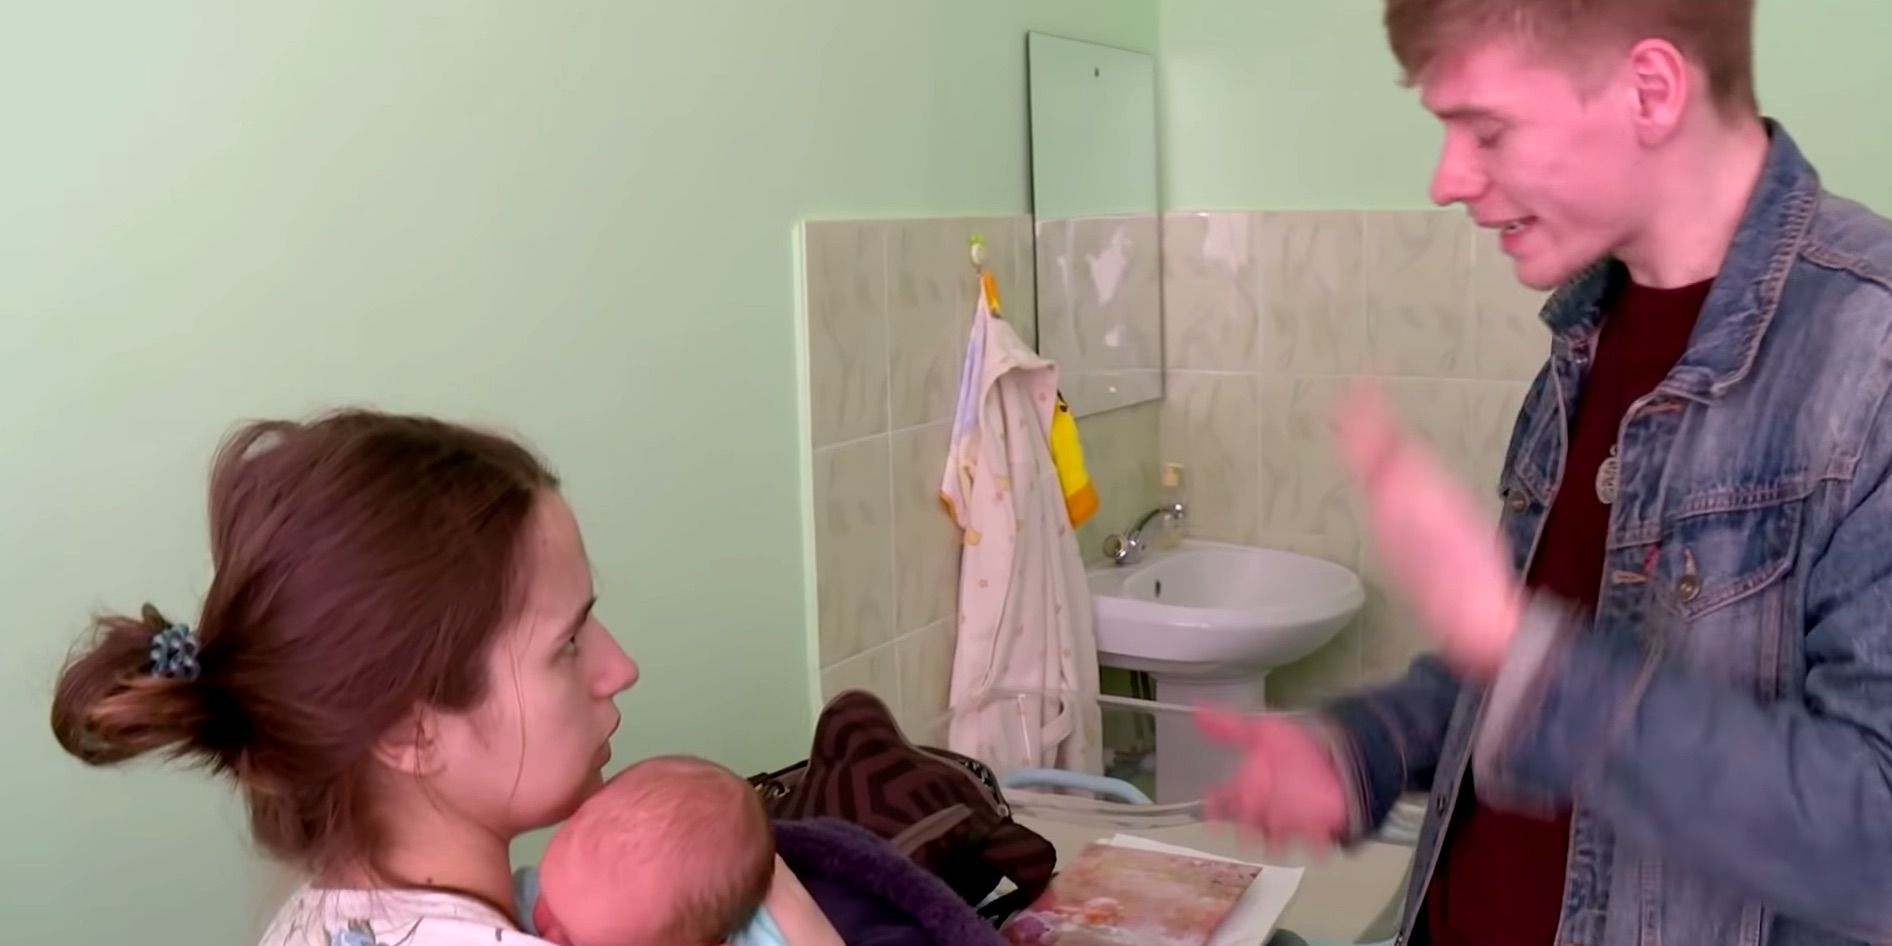 90 day fiance - Steven Yelled At Olga After She’d Just Given Birth